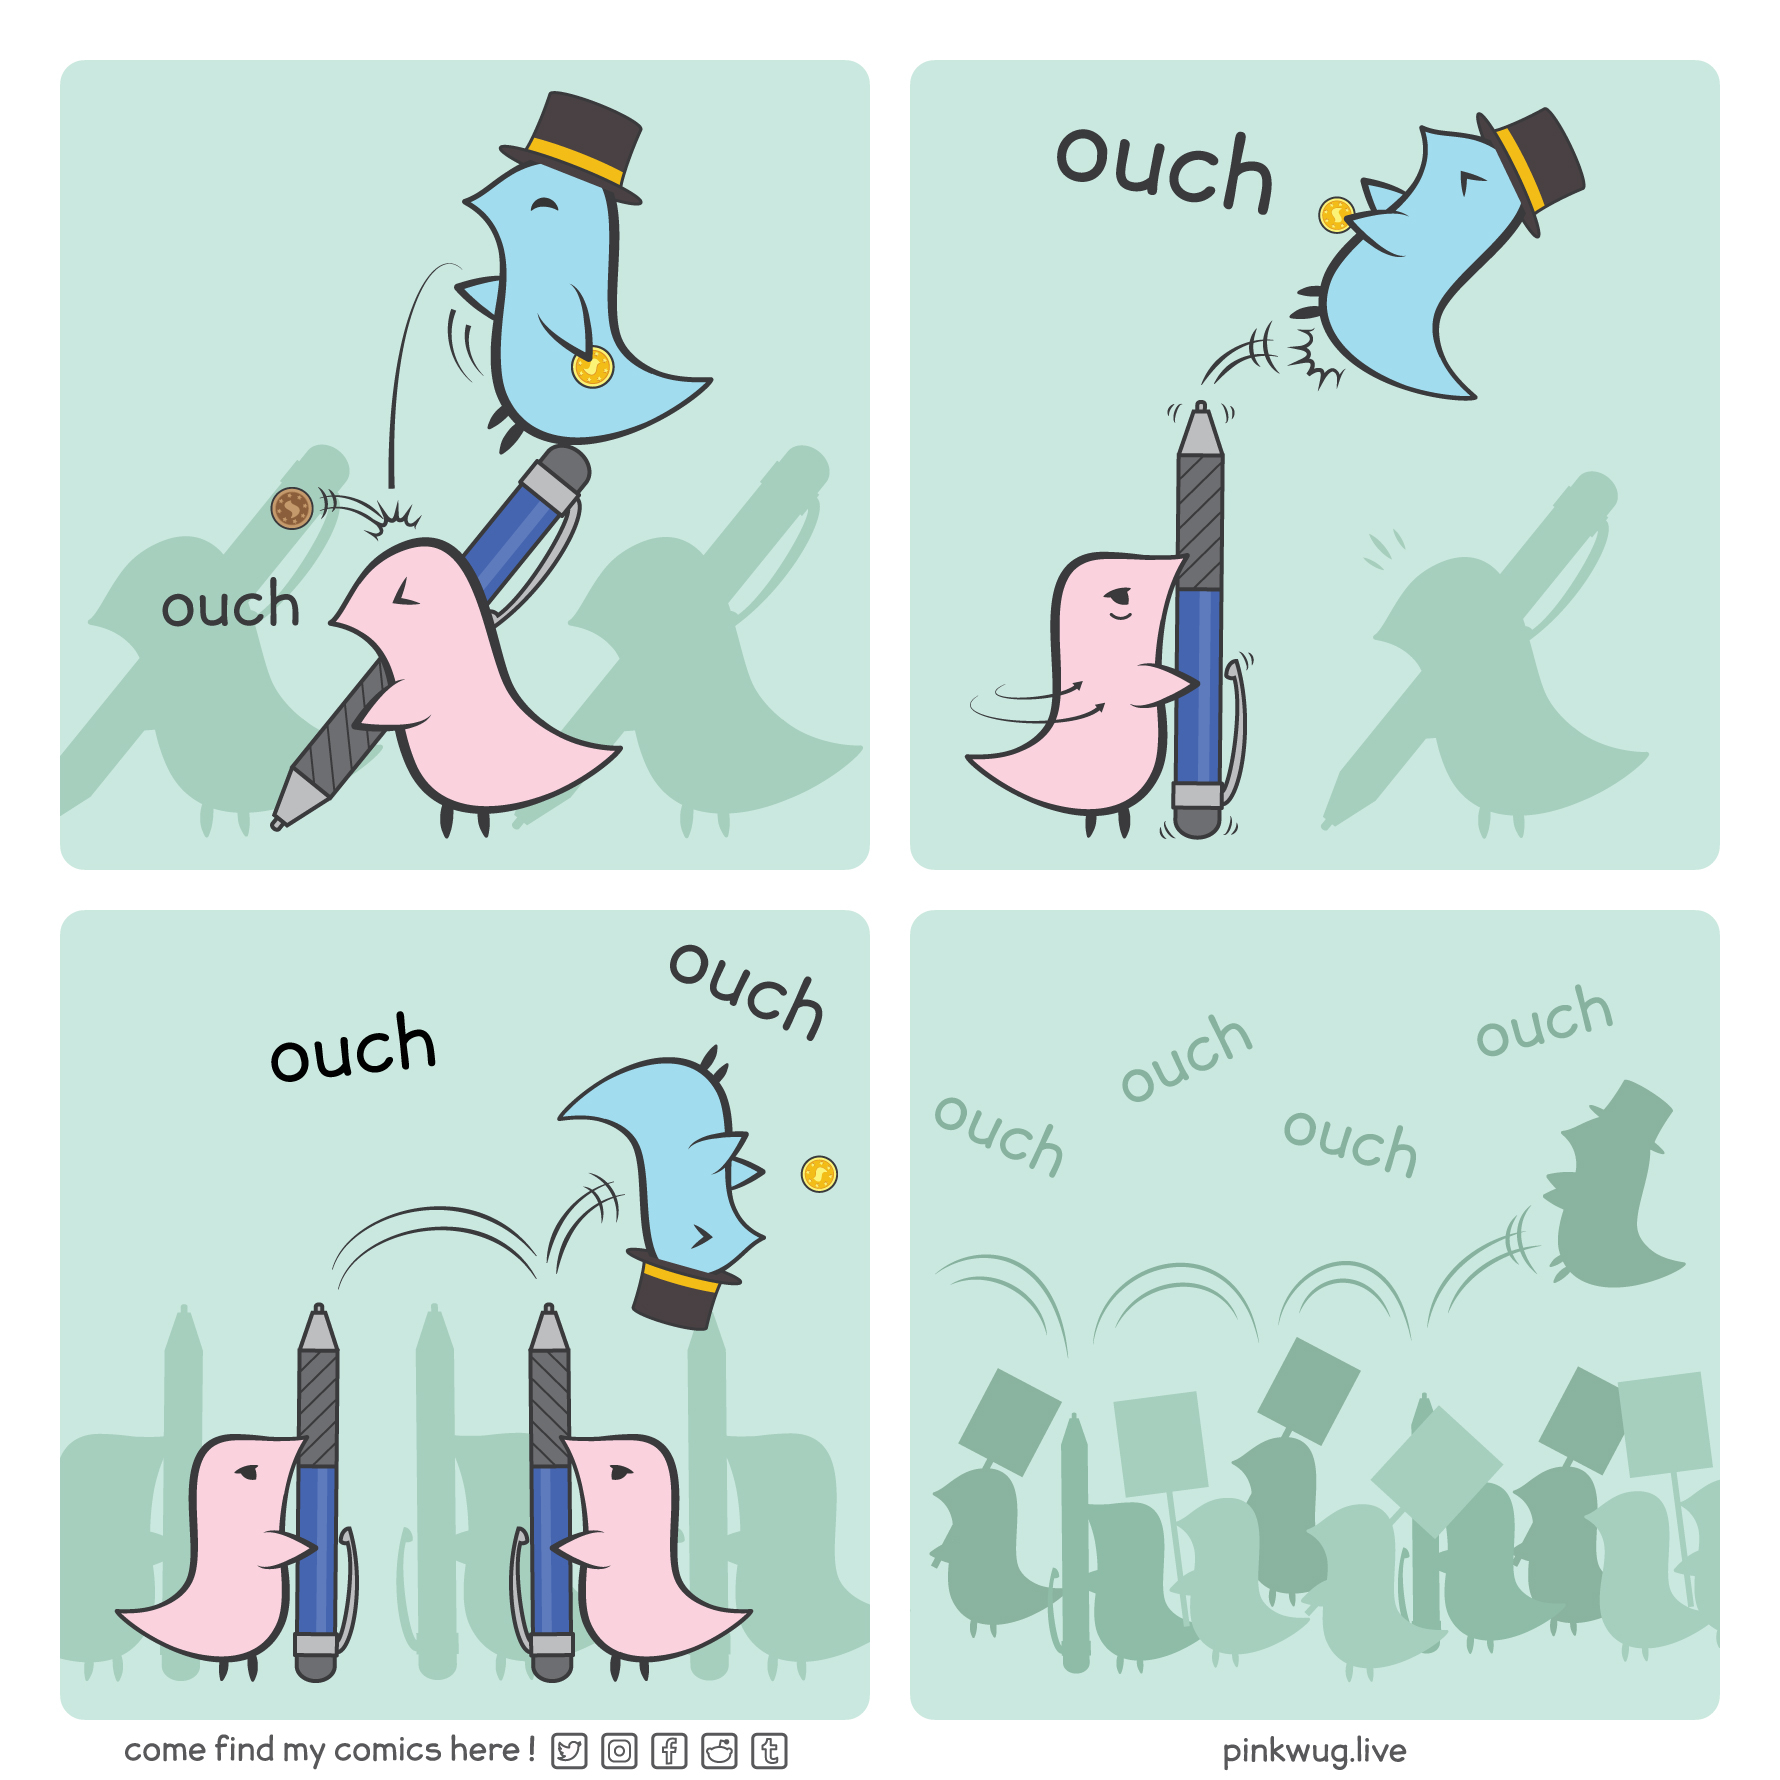 pinkwug comic: Panel 1. A blue wug with a top hat sits on top on a pen wielded by a pink wug. He throws a penny at the pink wug while holding a gold coin

Panel 2. Angry, the pink wug turns his pen upward and pokes at the blue wug, making him jump

Panel 3. The blue wug lands on top of an other pen pointed upward by other pink wugs, bouncing around, screaming ouch ouch and dropping his gold coin

Panel 4. There's a sea of wugs holding up pens and protest signs as the blue wug keeps bouncing on top of the crowd